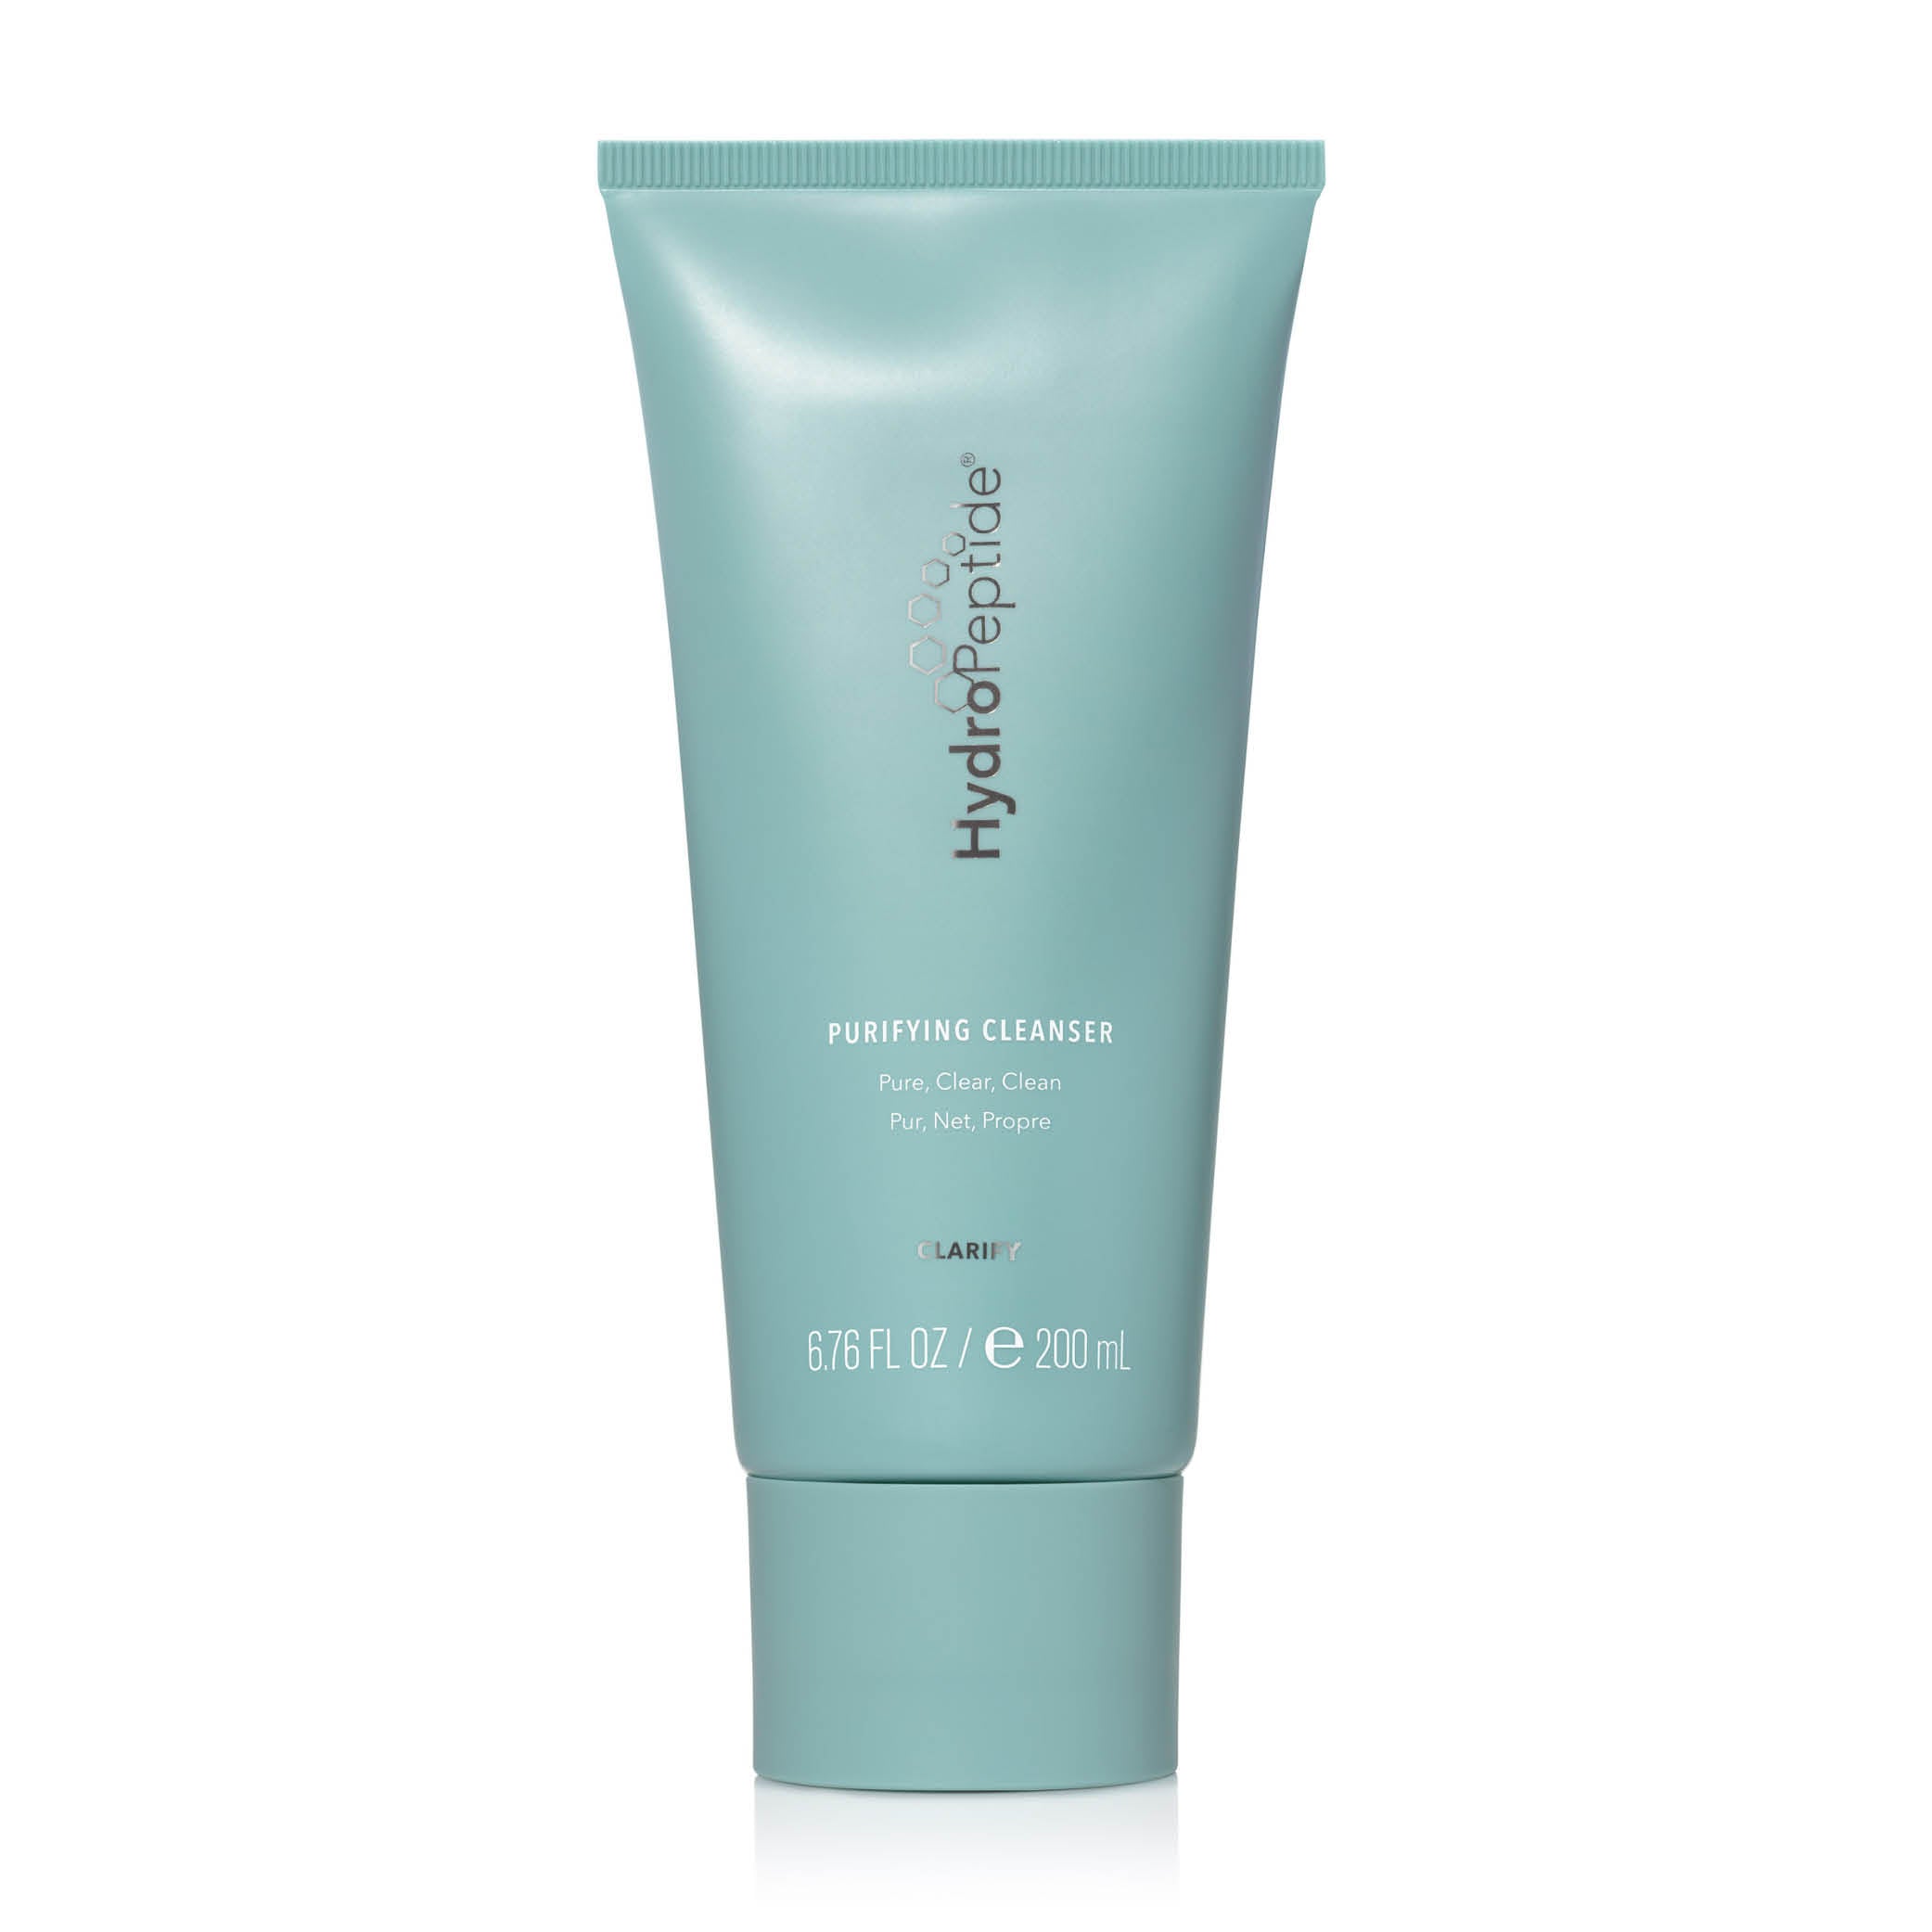 Purifying Cleanser - Pur, Net, Propre